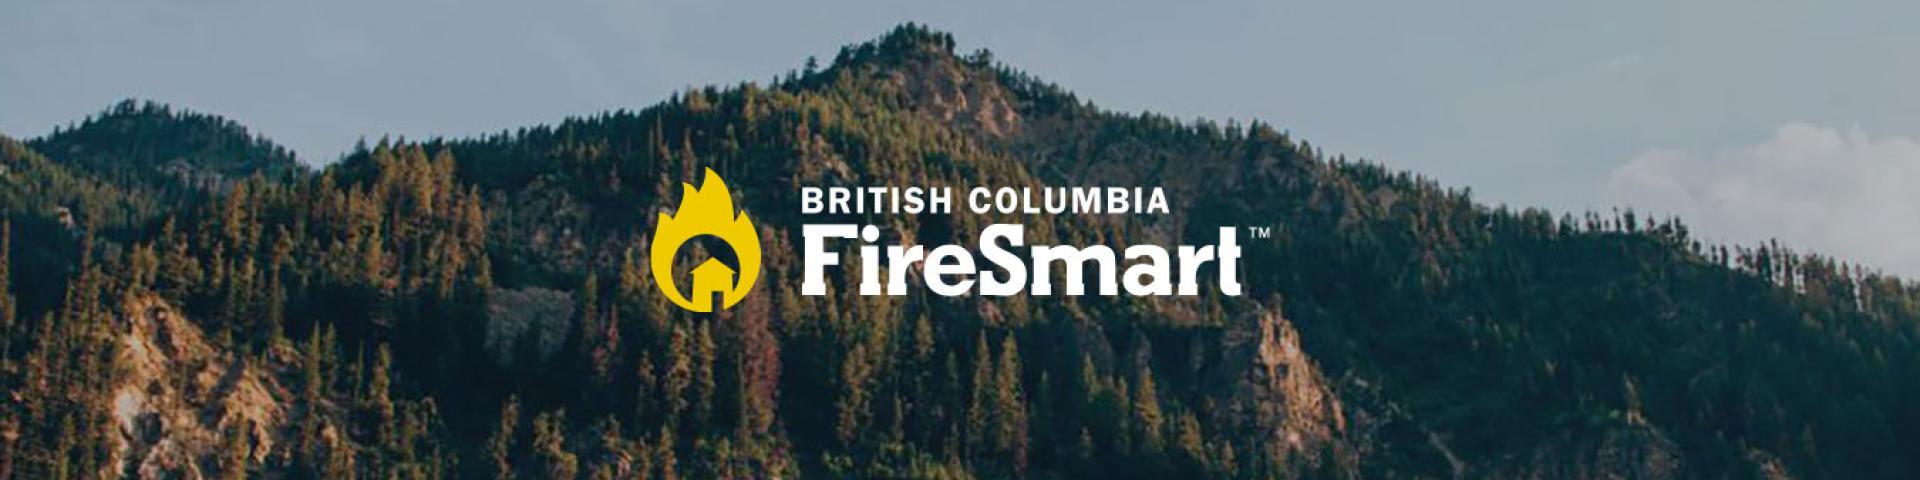 Rocky mountain with text in the foreground that reads: British Columbia FireSmart"